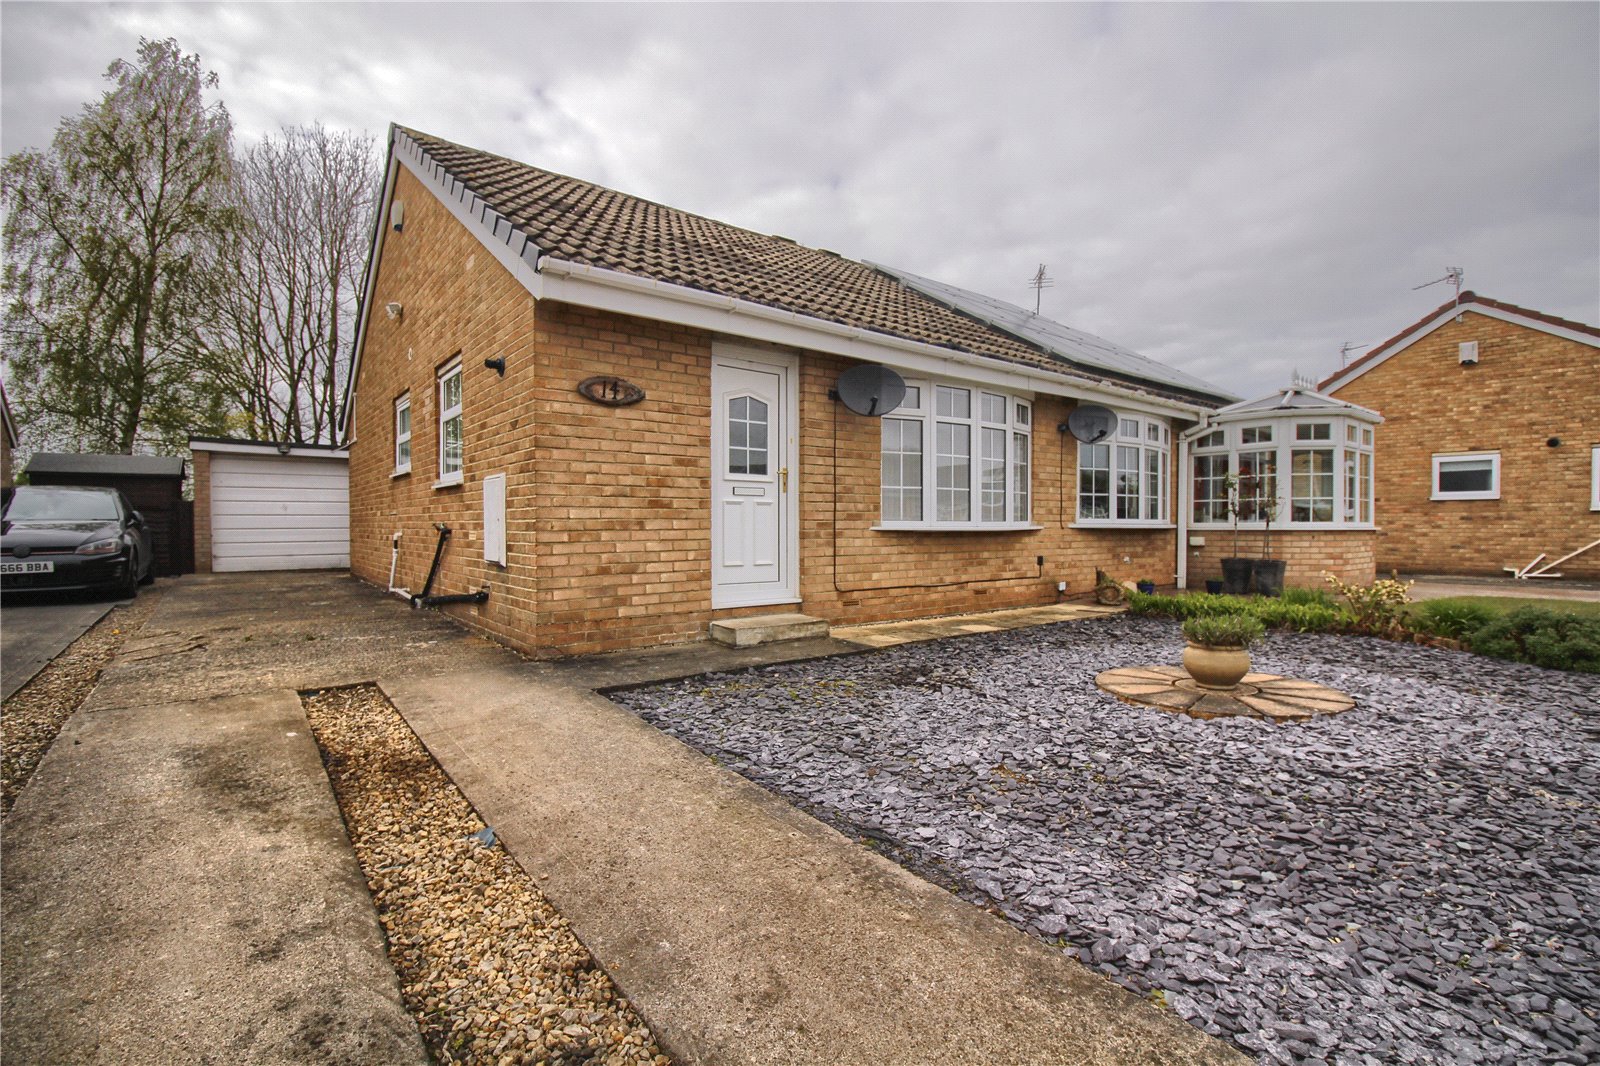 2 bed bungalow to rent in Kennthorpe, Nunthorpe - Property Image 1